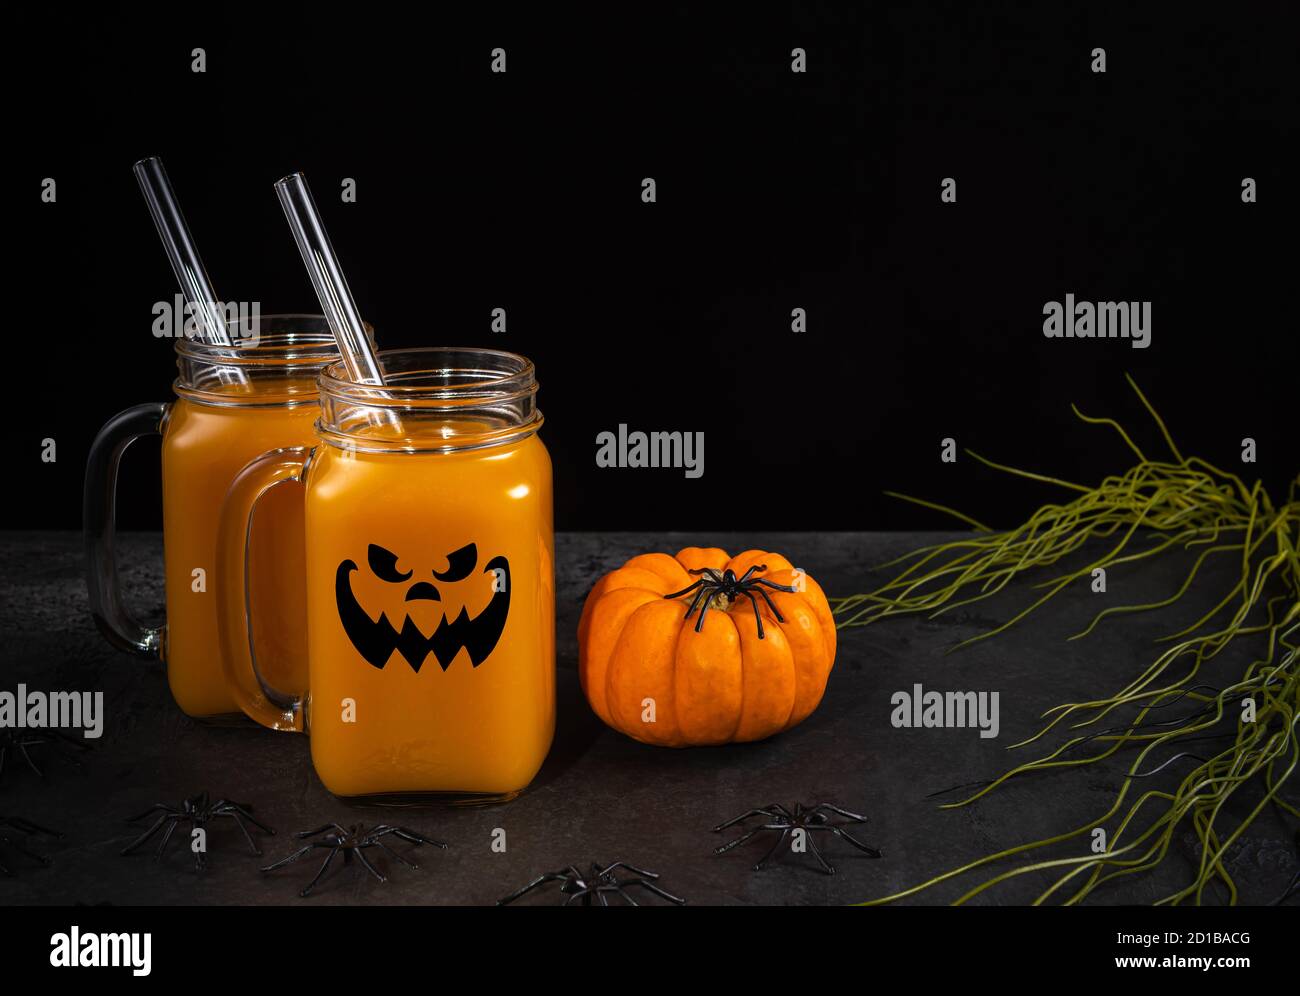 Glass jars with halloween face, pumpkin mocktail and glass straws on black textured table decorated with spiders, spooky plants and pumpkin. Horizonta Stock Photo